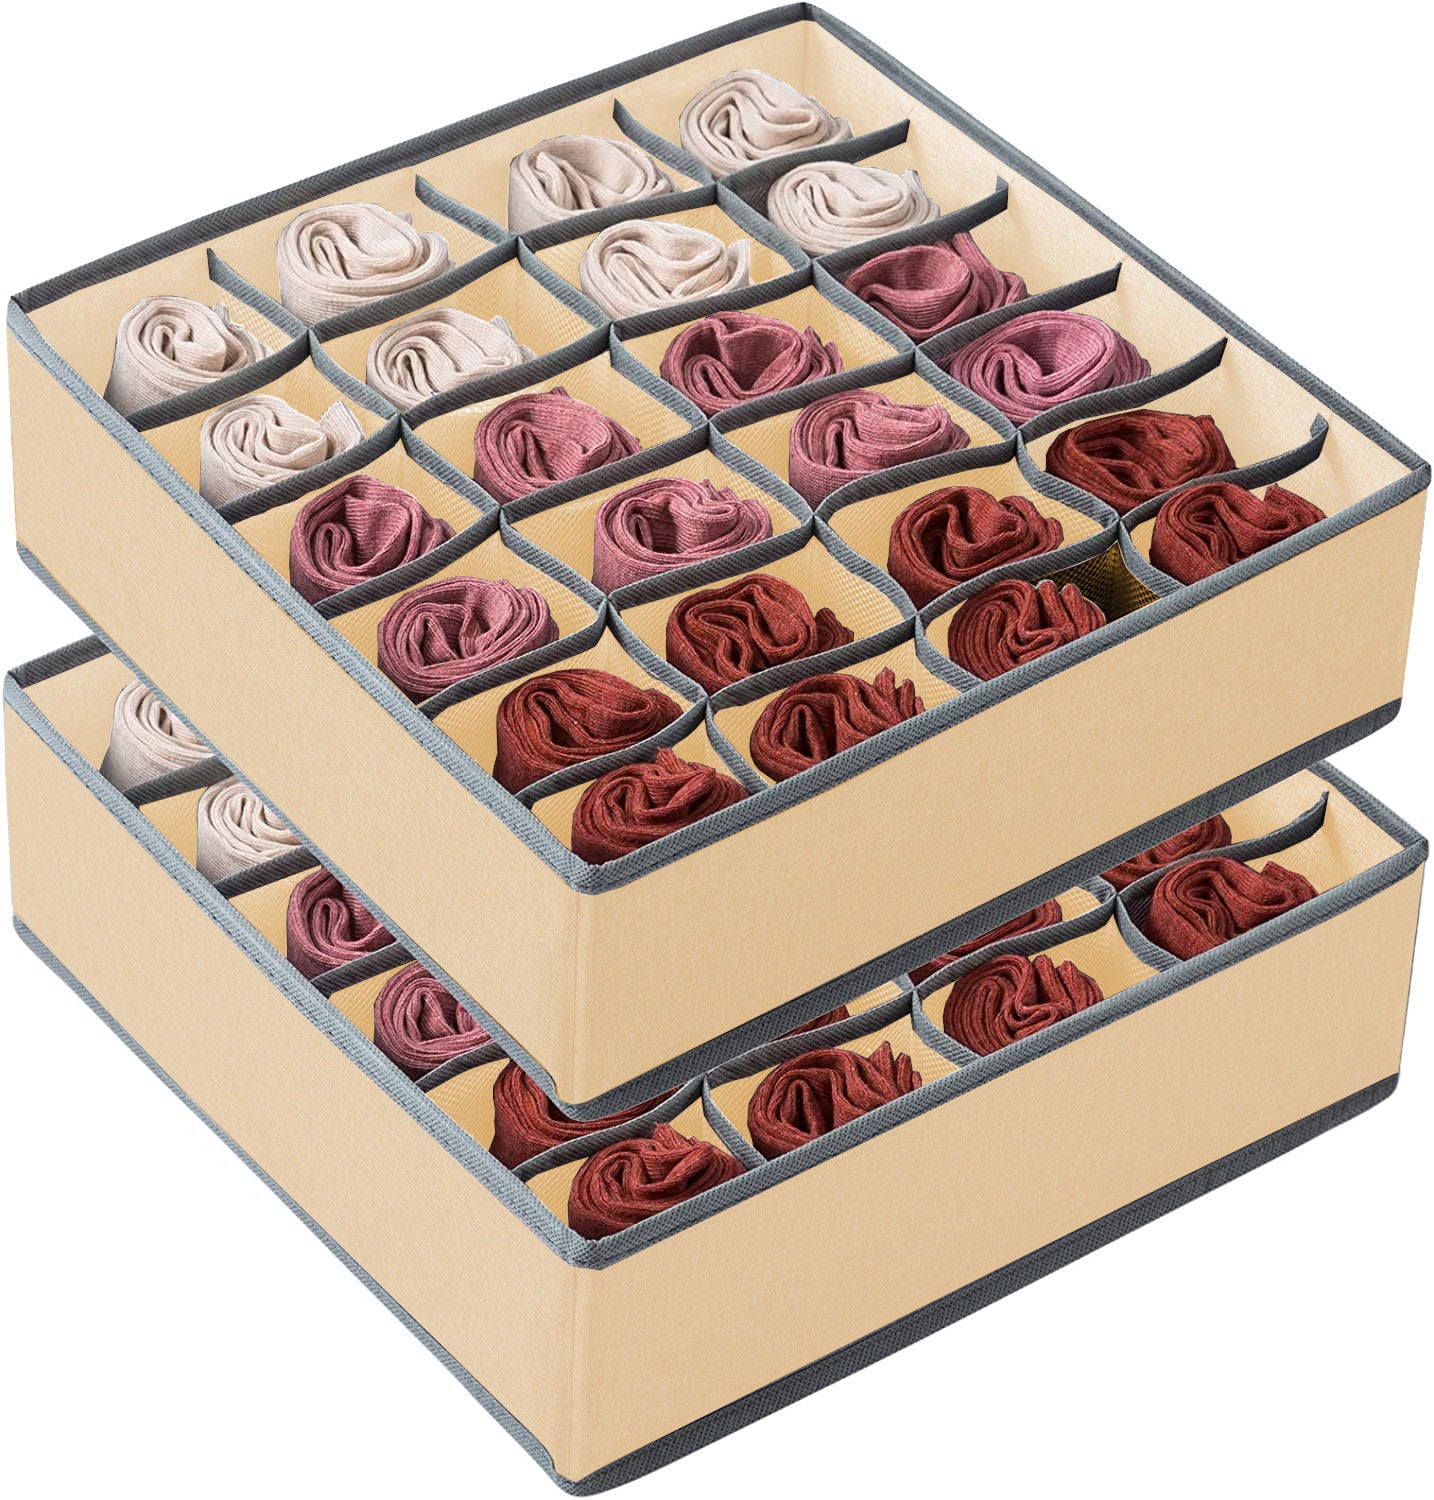 Set of 2 Fabric Drawer Organizer Divider Storage Boxes for Storing Socks, Underwear, Ties, Scarves (Beige) from Deals499 at Deals499